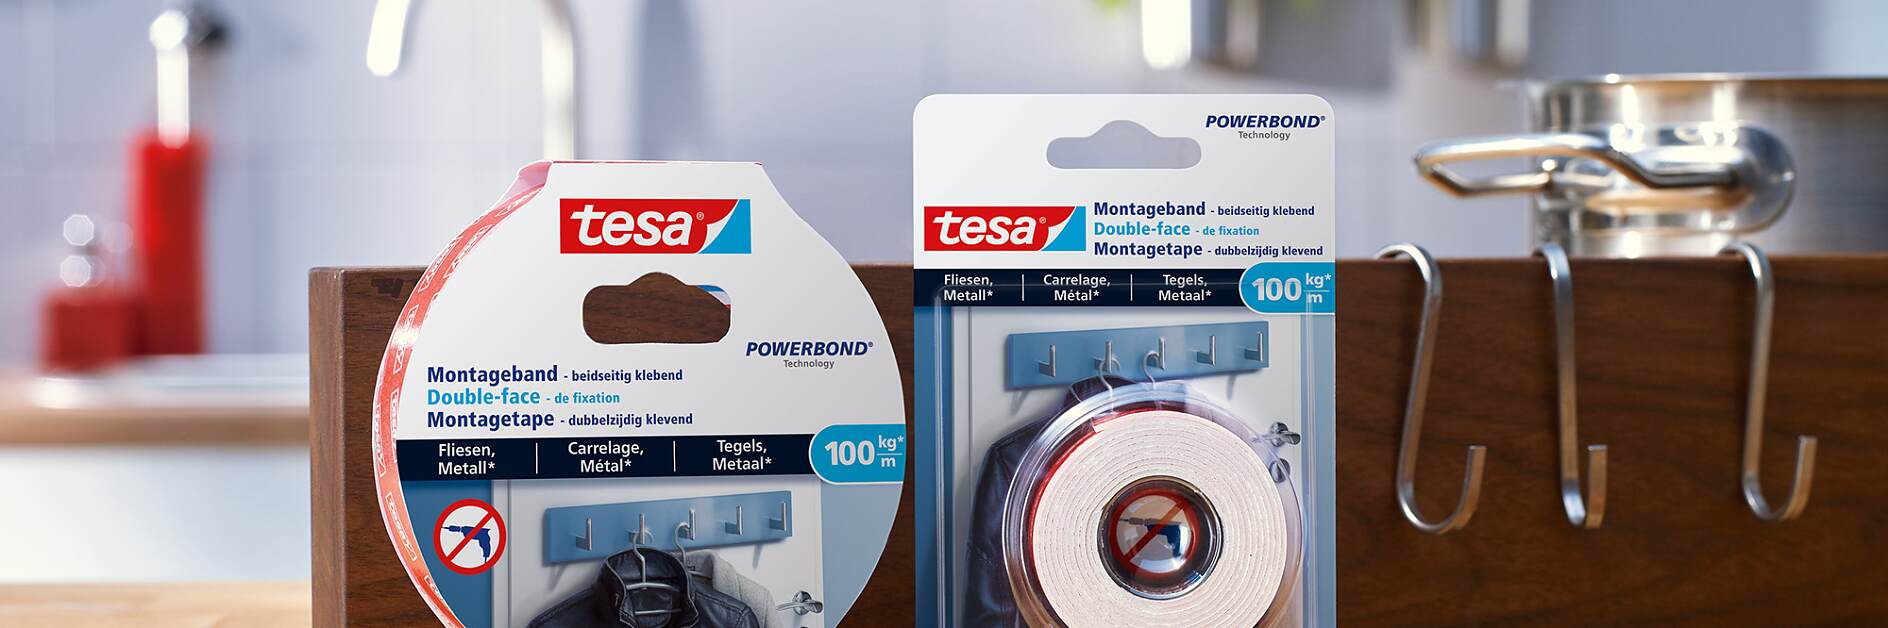 How to use tesa® Mounting Tape for Tiles & Metal 100kg/m.